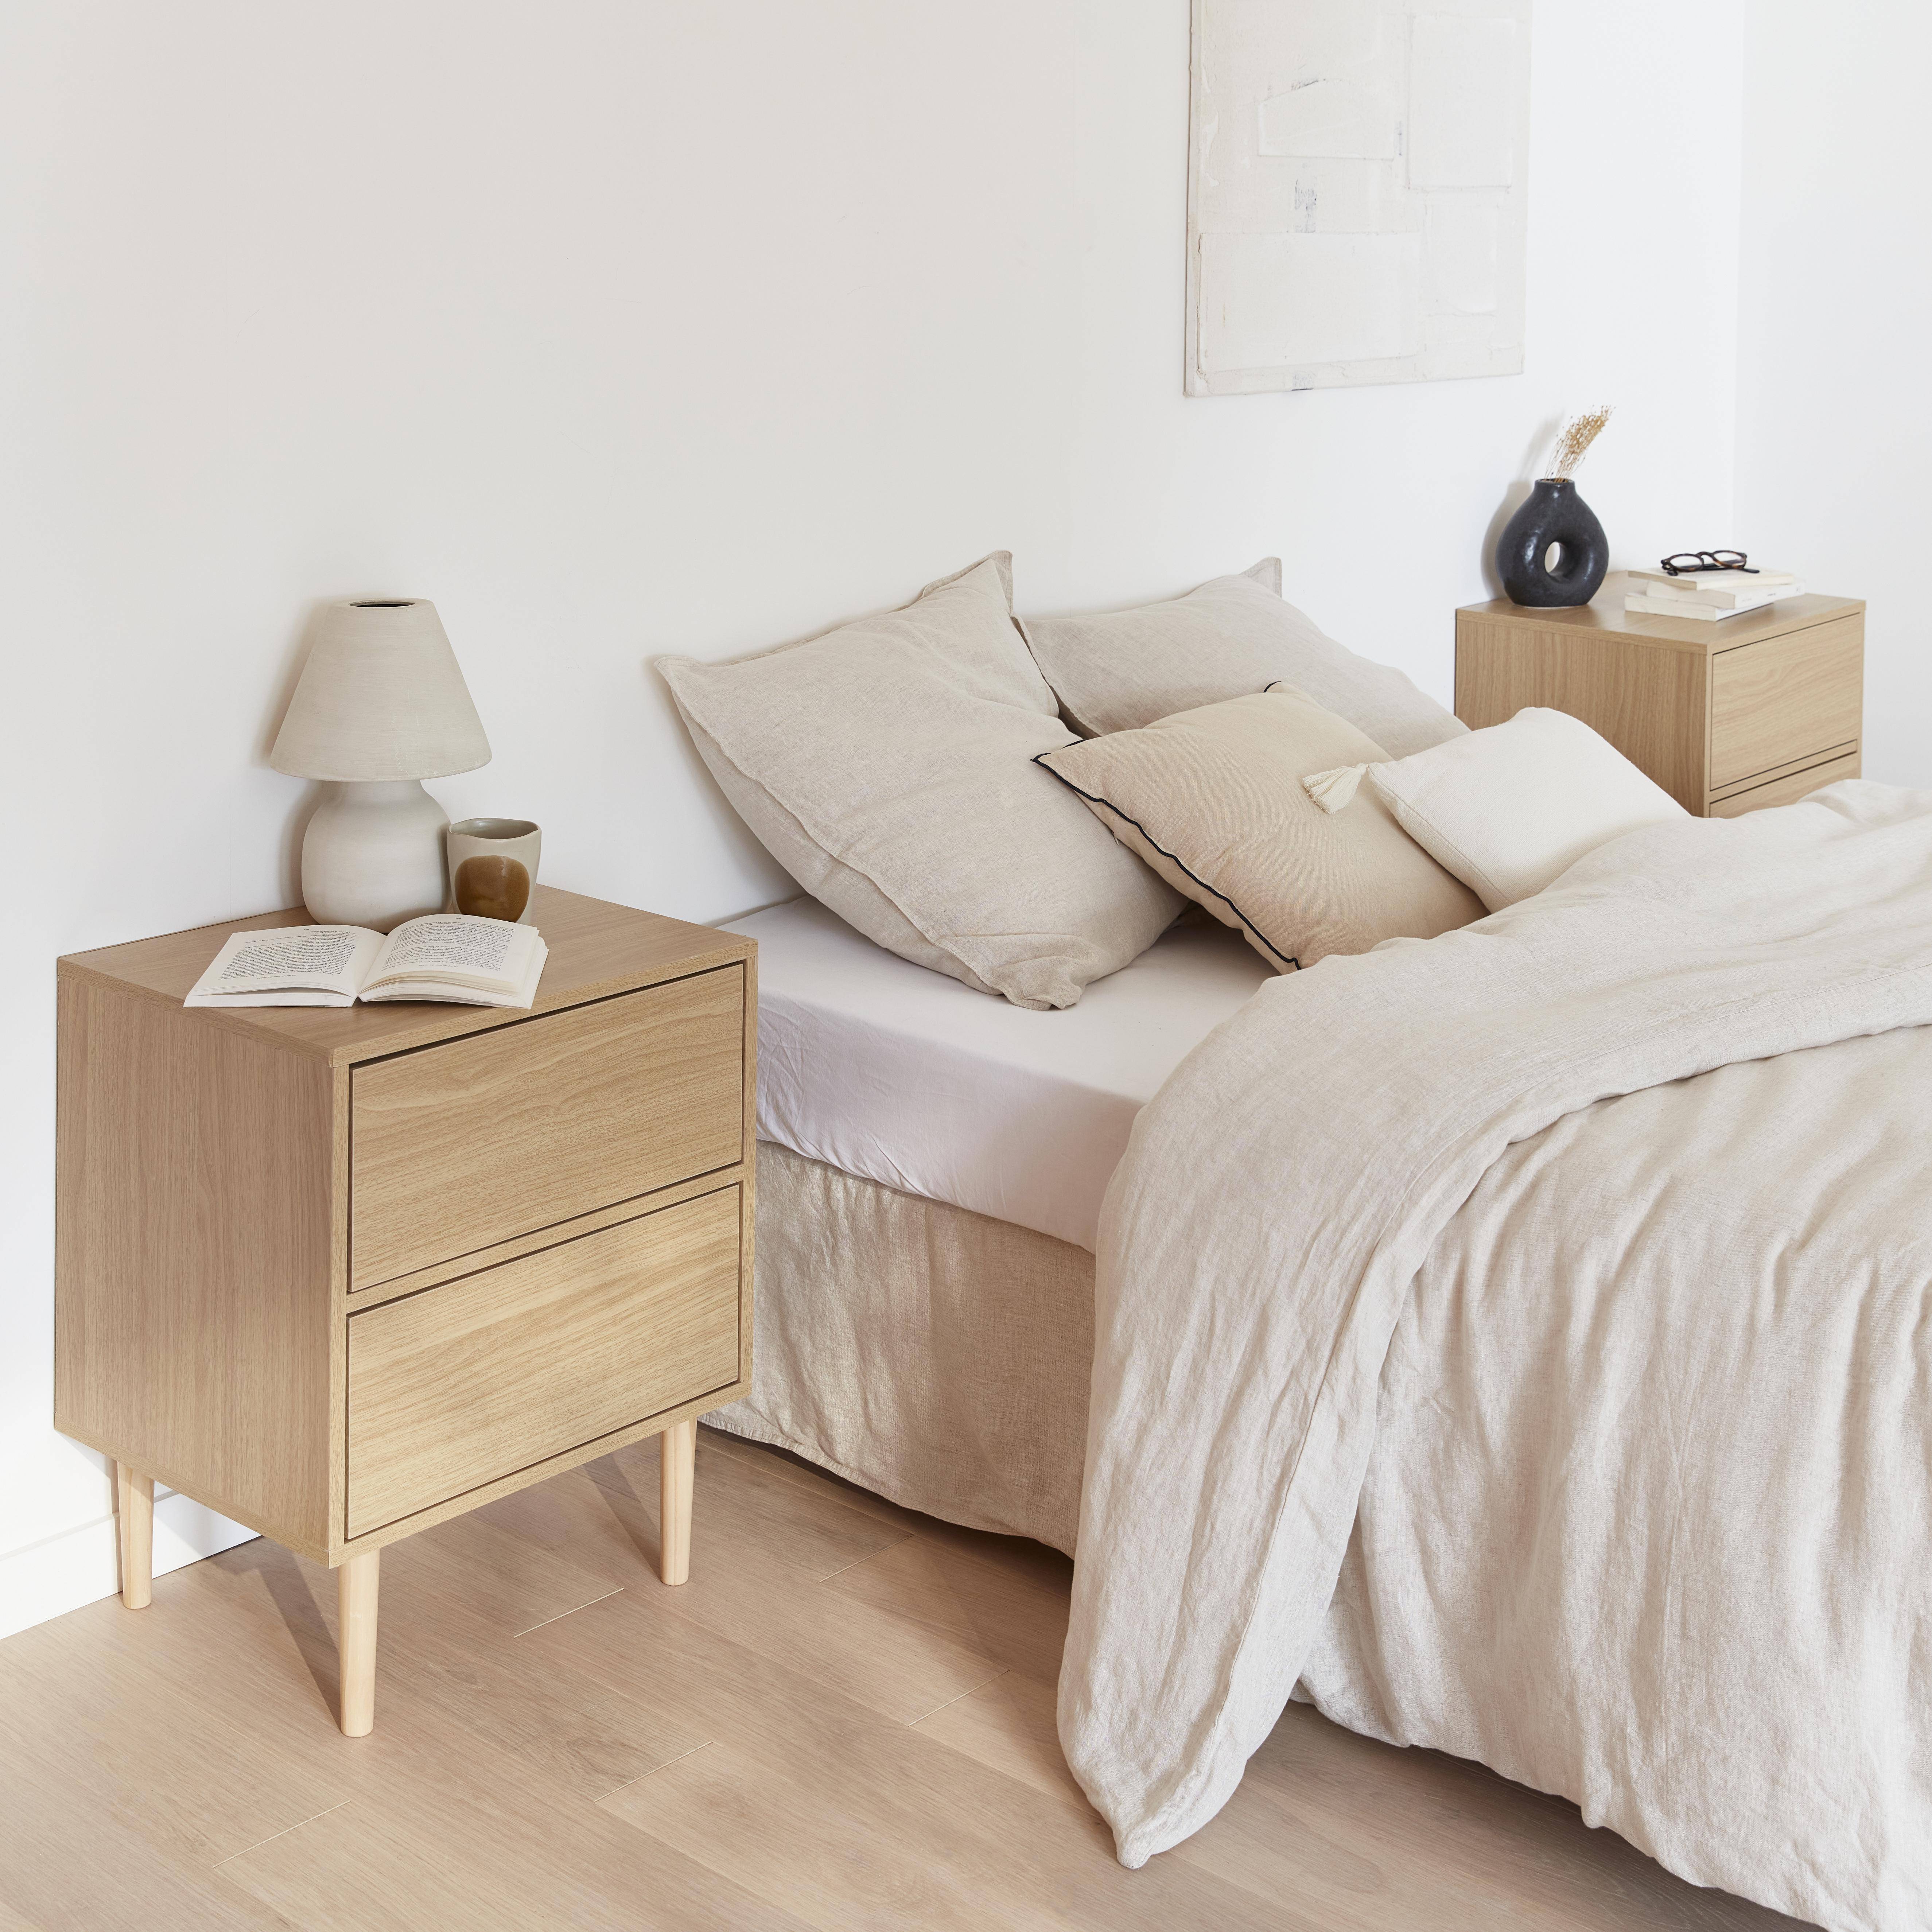 Pair of wood-effect bedside tables with two drawers, 48x40x59cm - Mika - Natural Wood Photo2